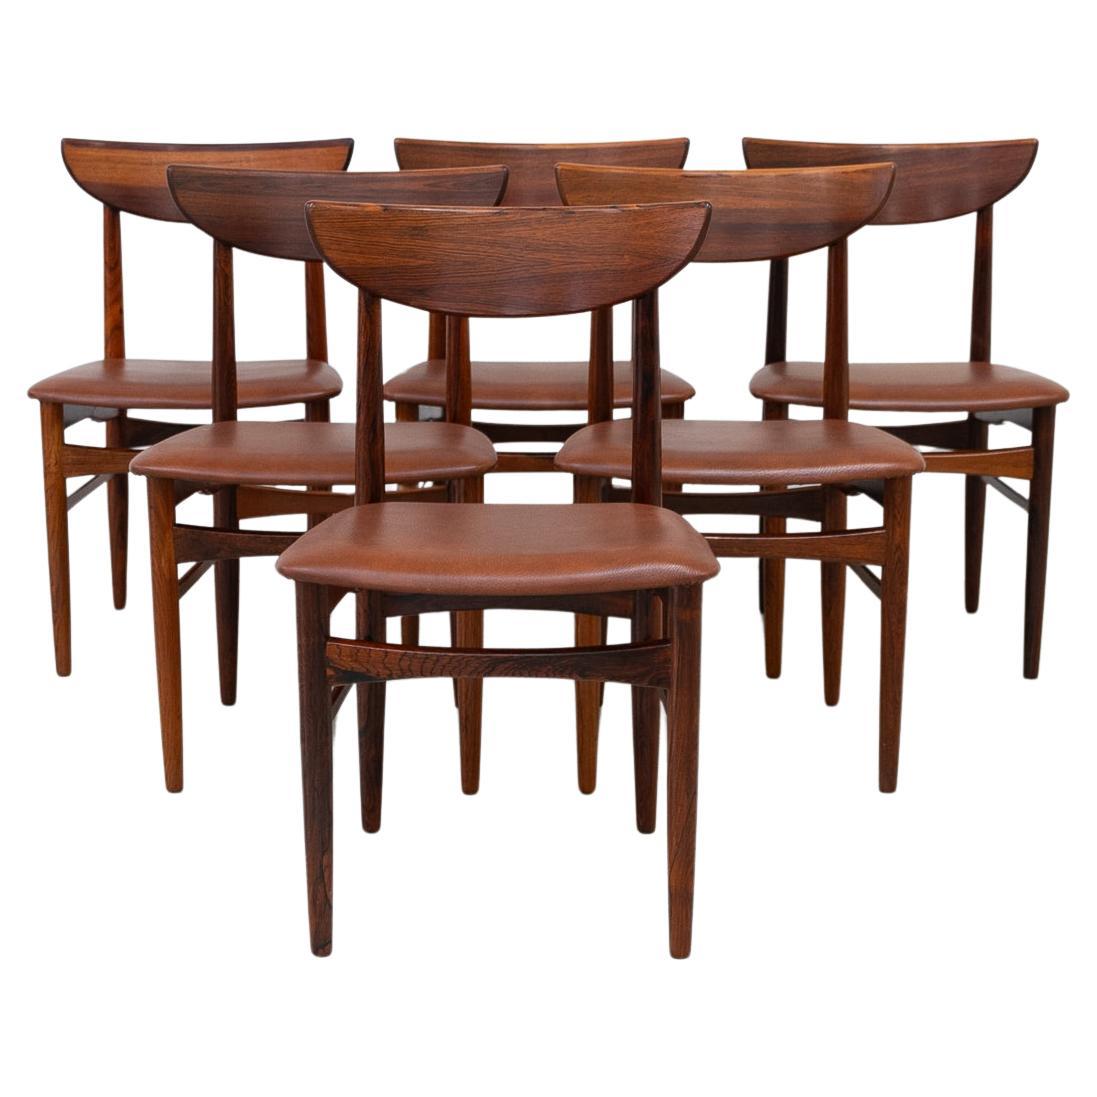 Vintage Danish Rosewood Dining Chairs by E.W. Bach for Skovby, 1960s. Set of 6. For Sale